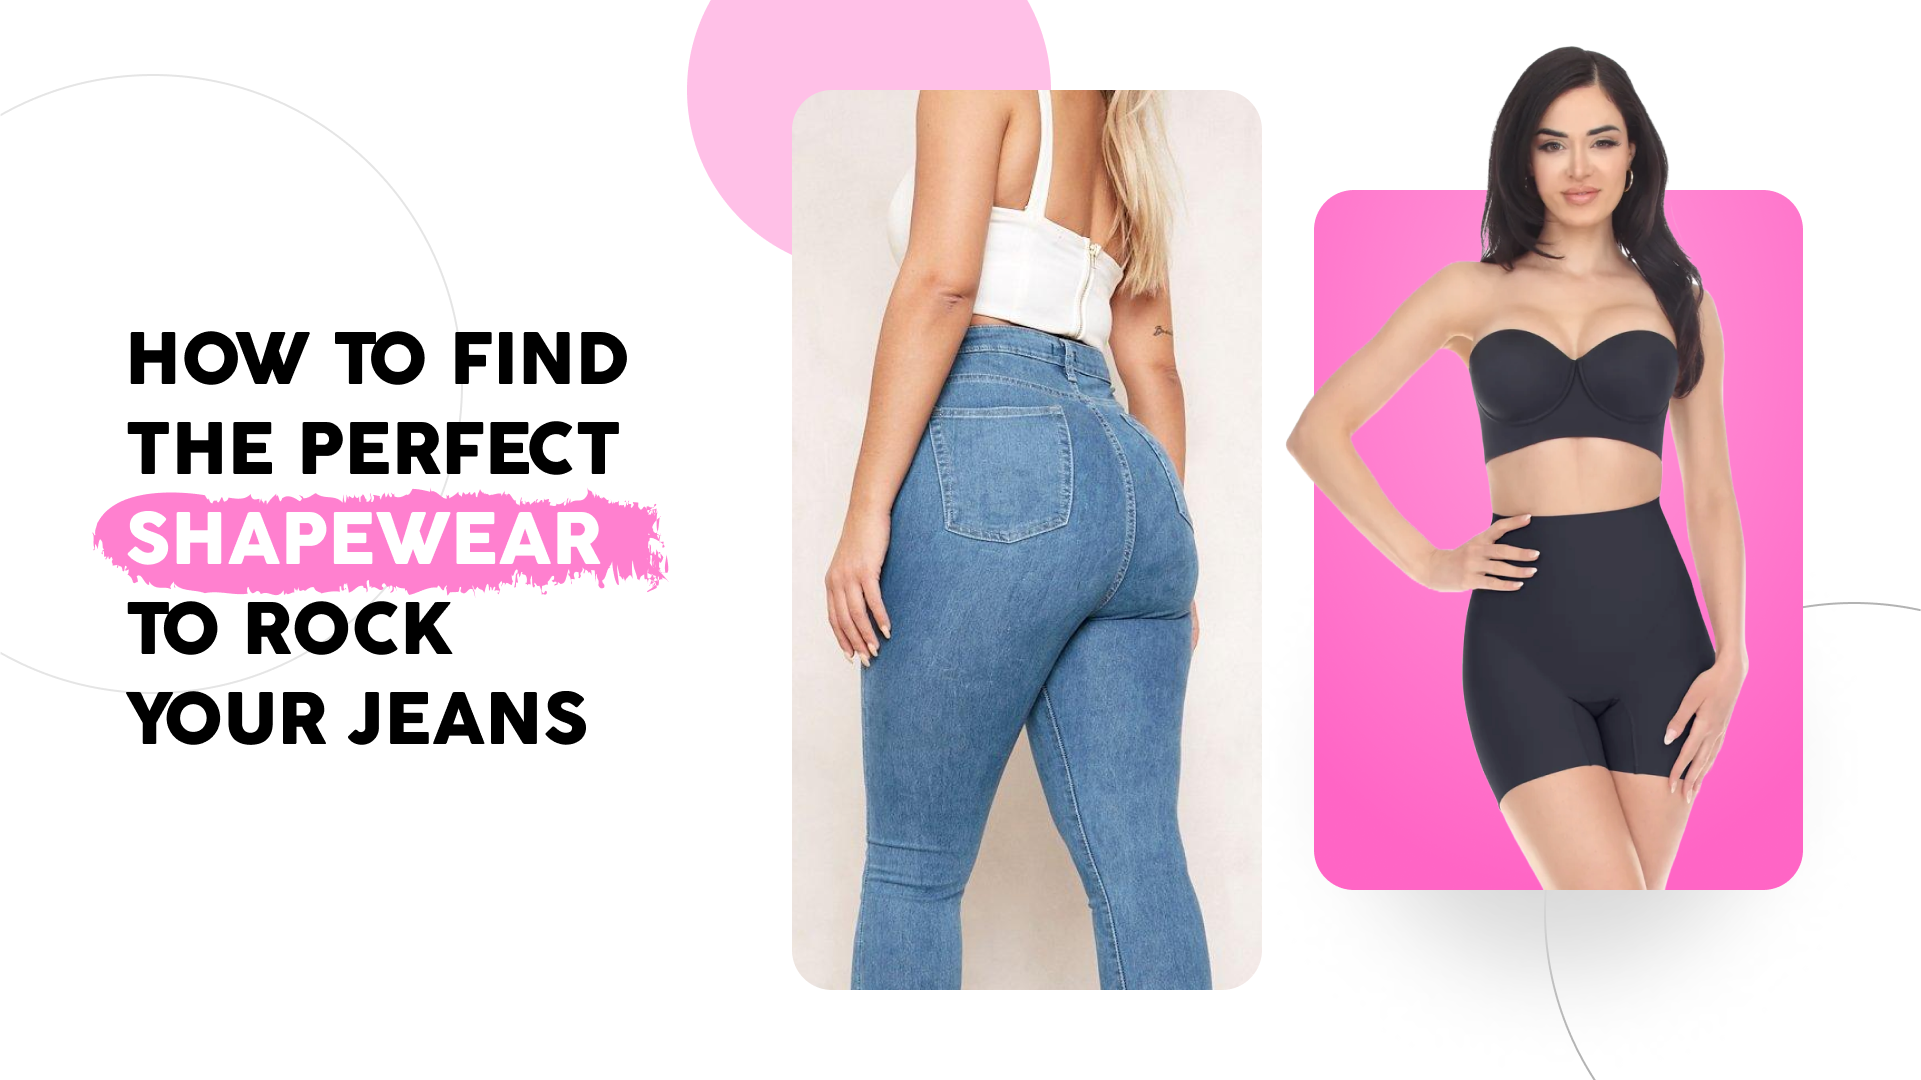 How to Find the Perfect Shapewear to Rock Your Jeans